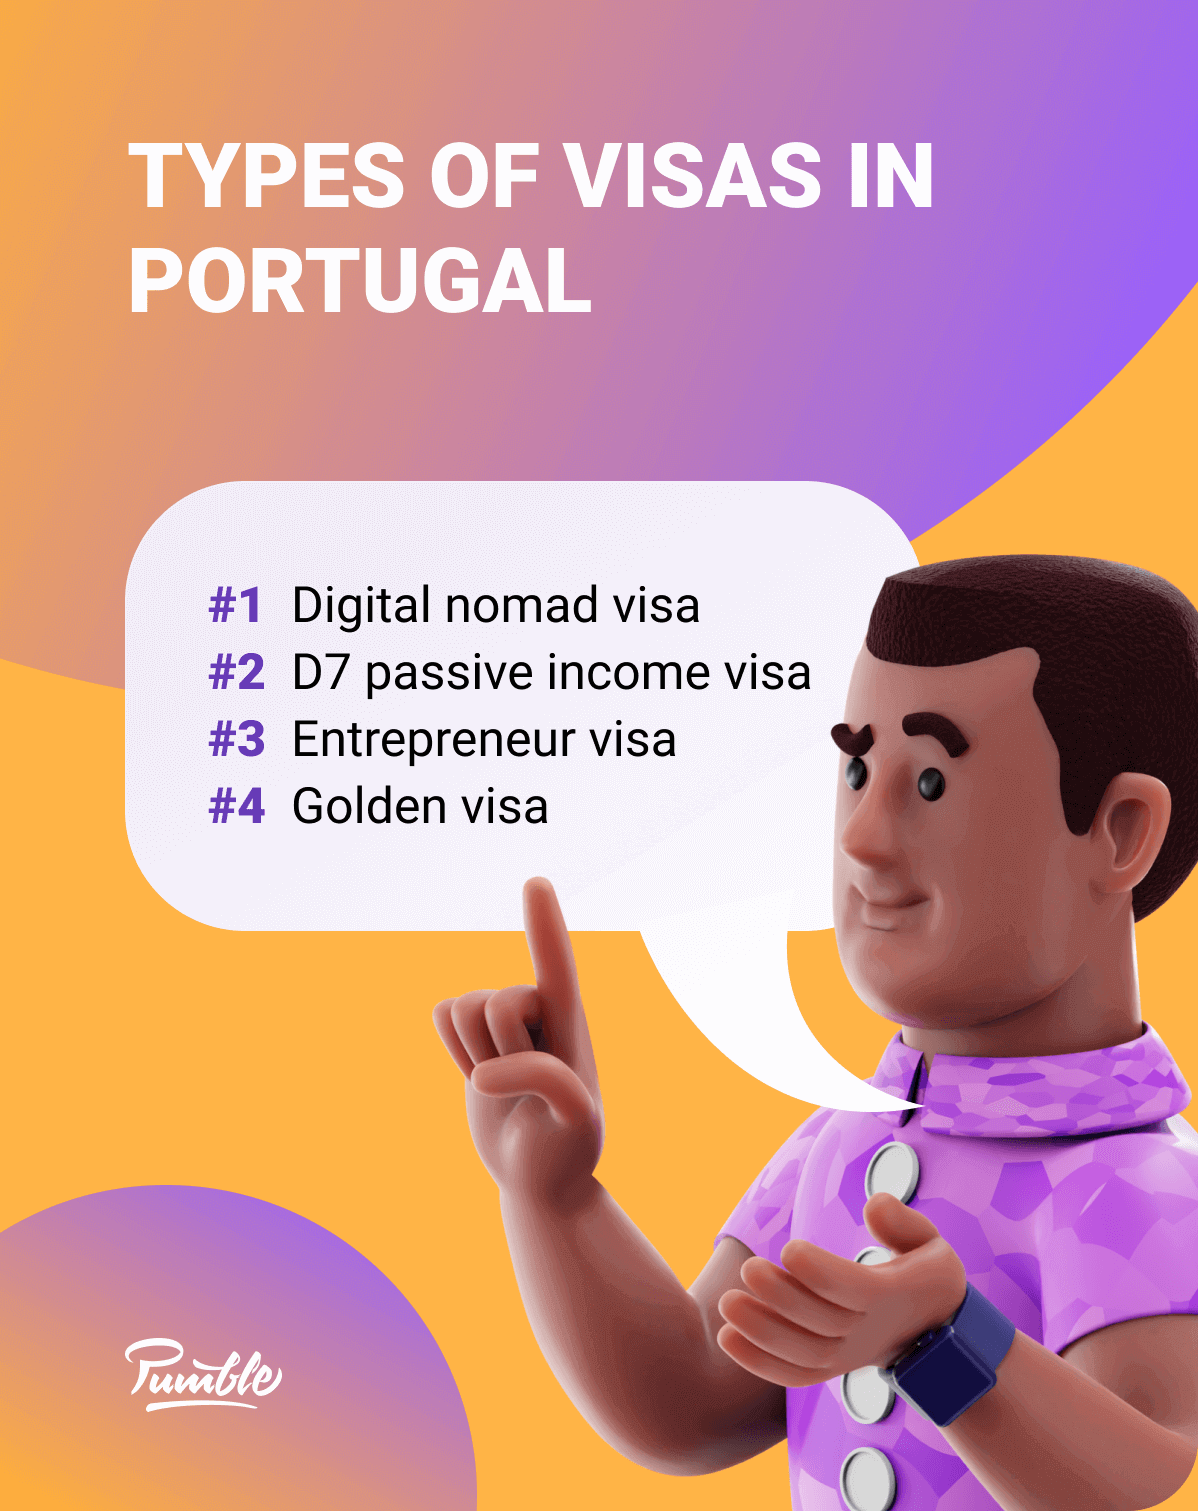 There are 4 different types of visas that digital nomads can apply for in Portugal